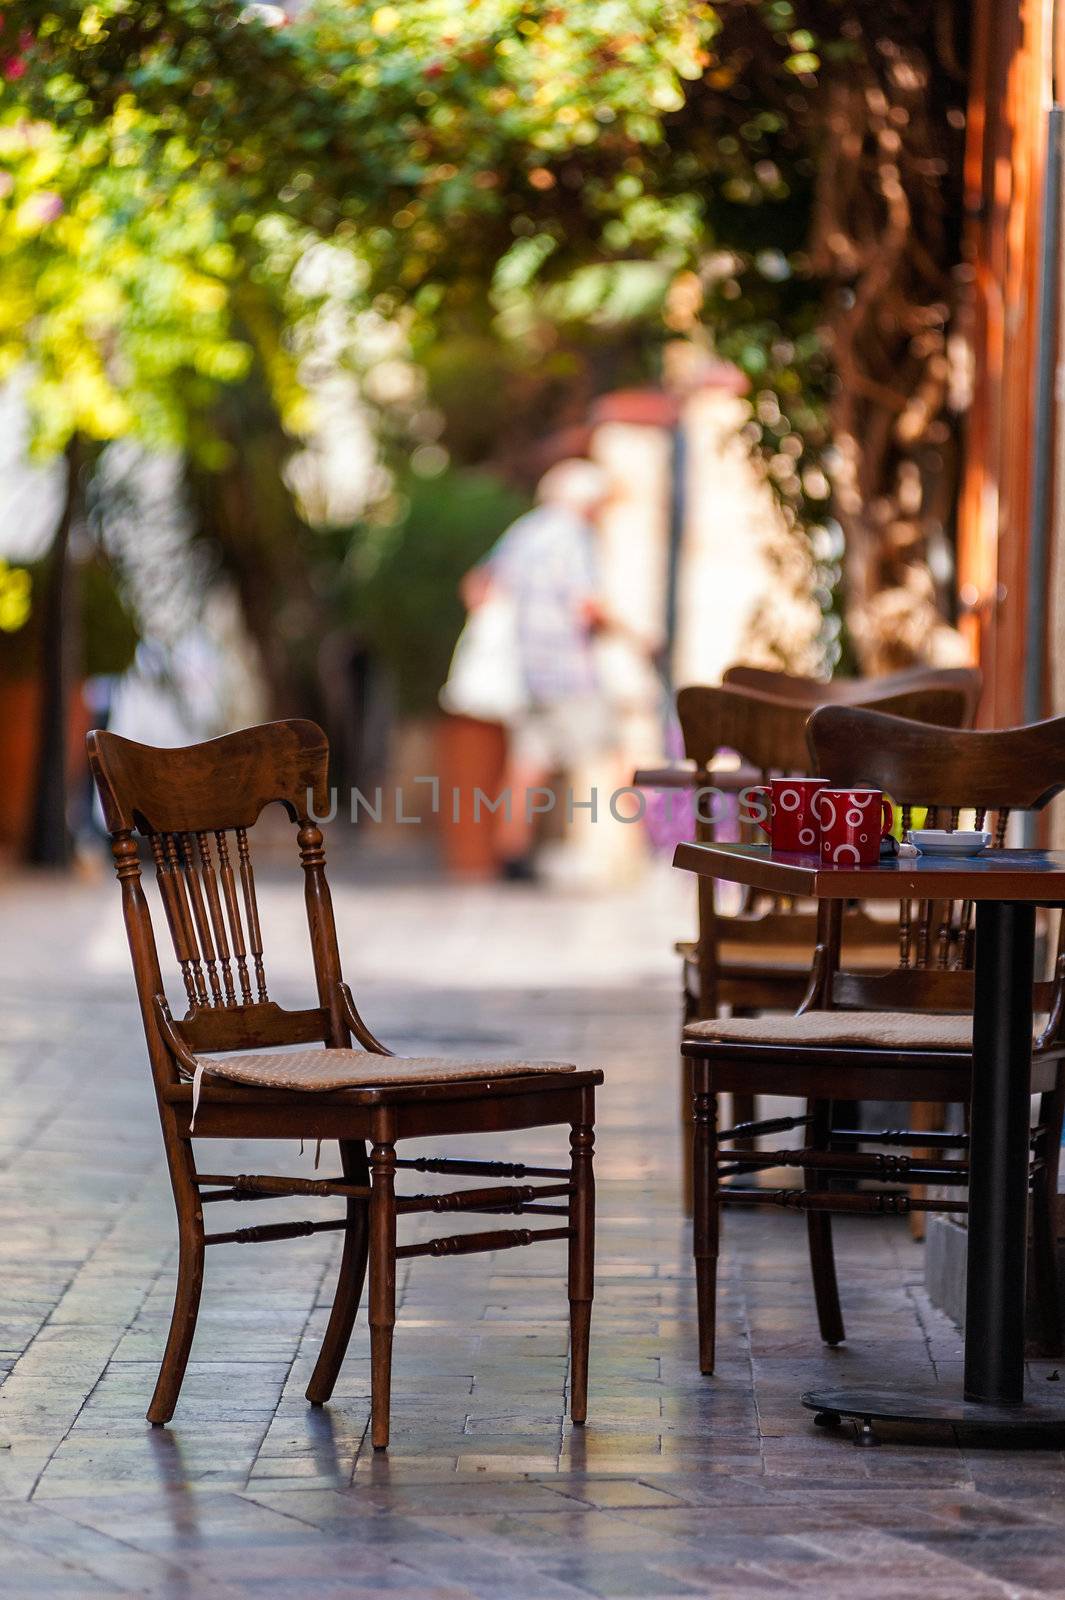 Street view of a empty coffee terrace with tables and chairs in old town of Antalya, Turkey. Small depth of field.